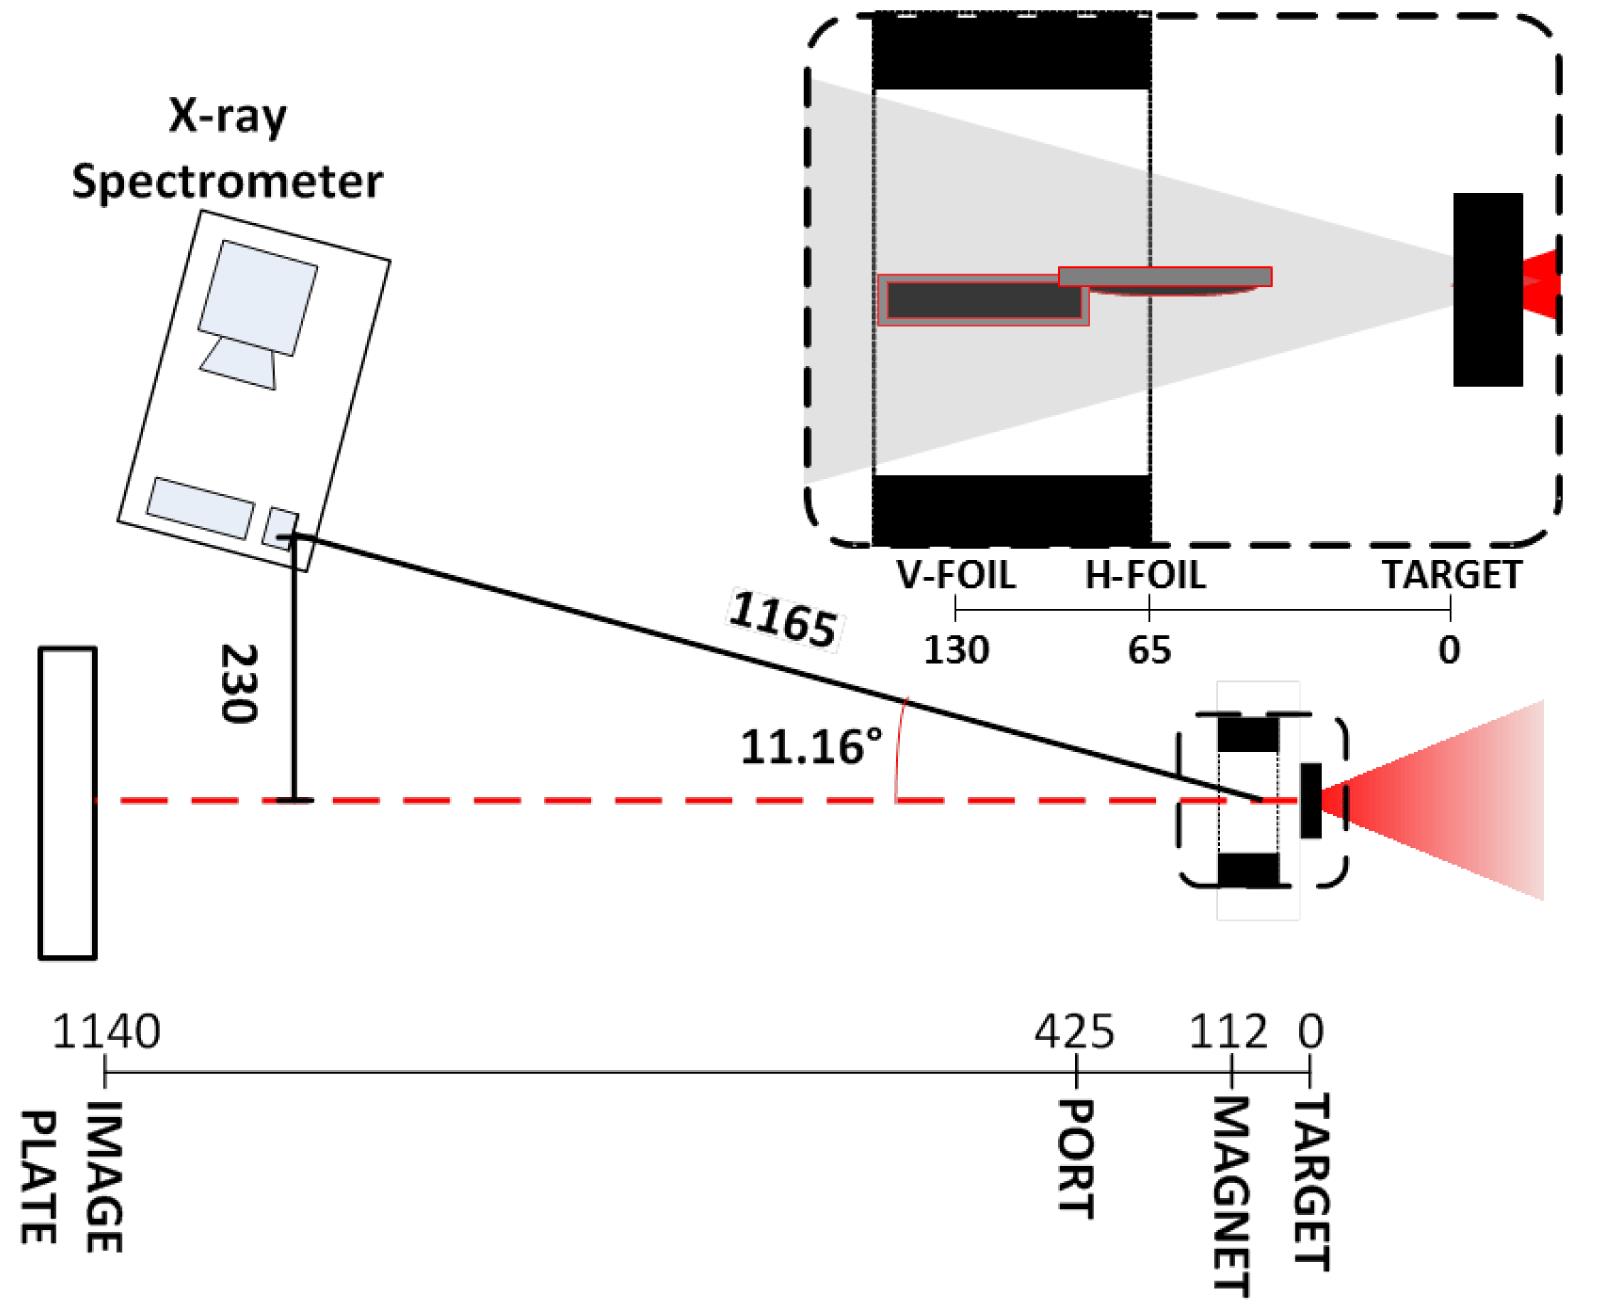 Schematic of the primary imaging diagnostics. Main image shows the emission line, with penumbral foils and hard X-ray spectrometers included. The inset is an expansion of the penumbral foil setup, and the grey cone represents the forward X-ray emission from target, with all distances in mm measured from target position.